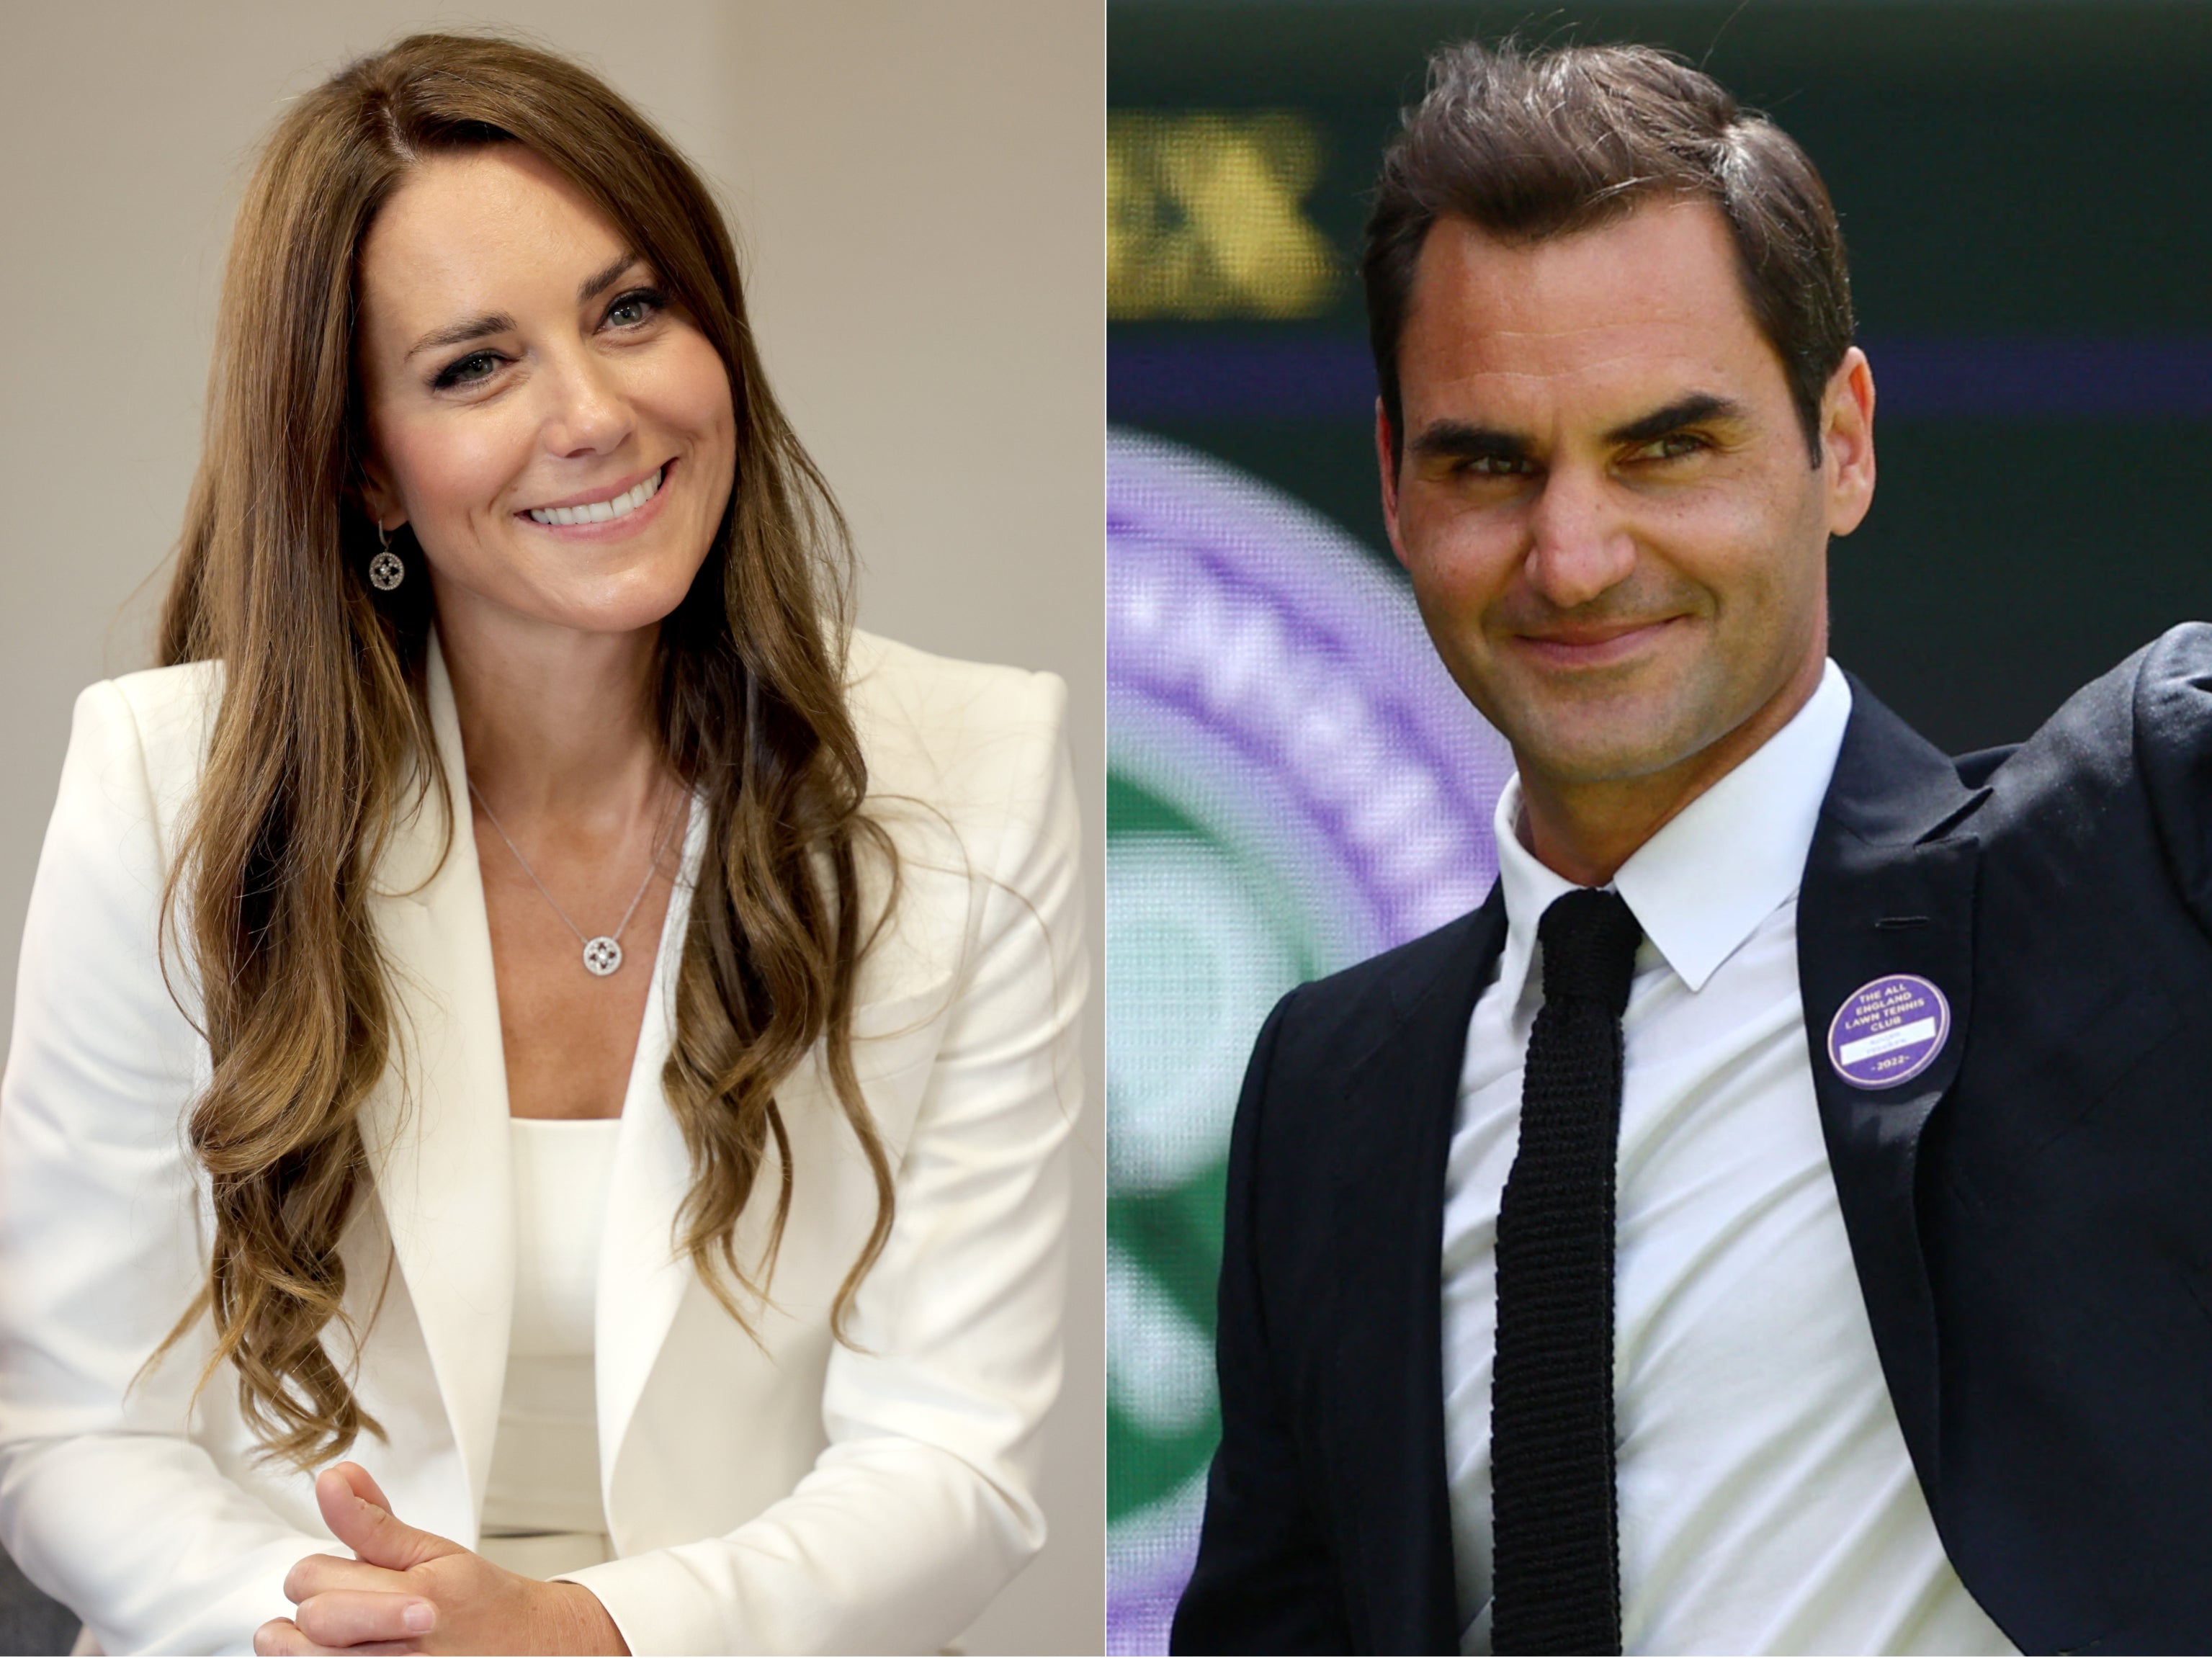 Roger Federer Returns To Wimbledon, Chats With Catherine, Princess